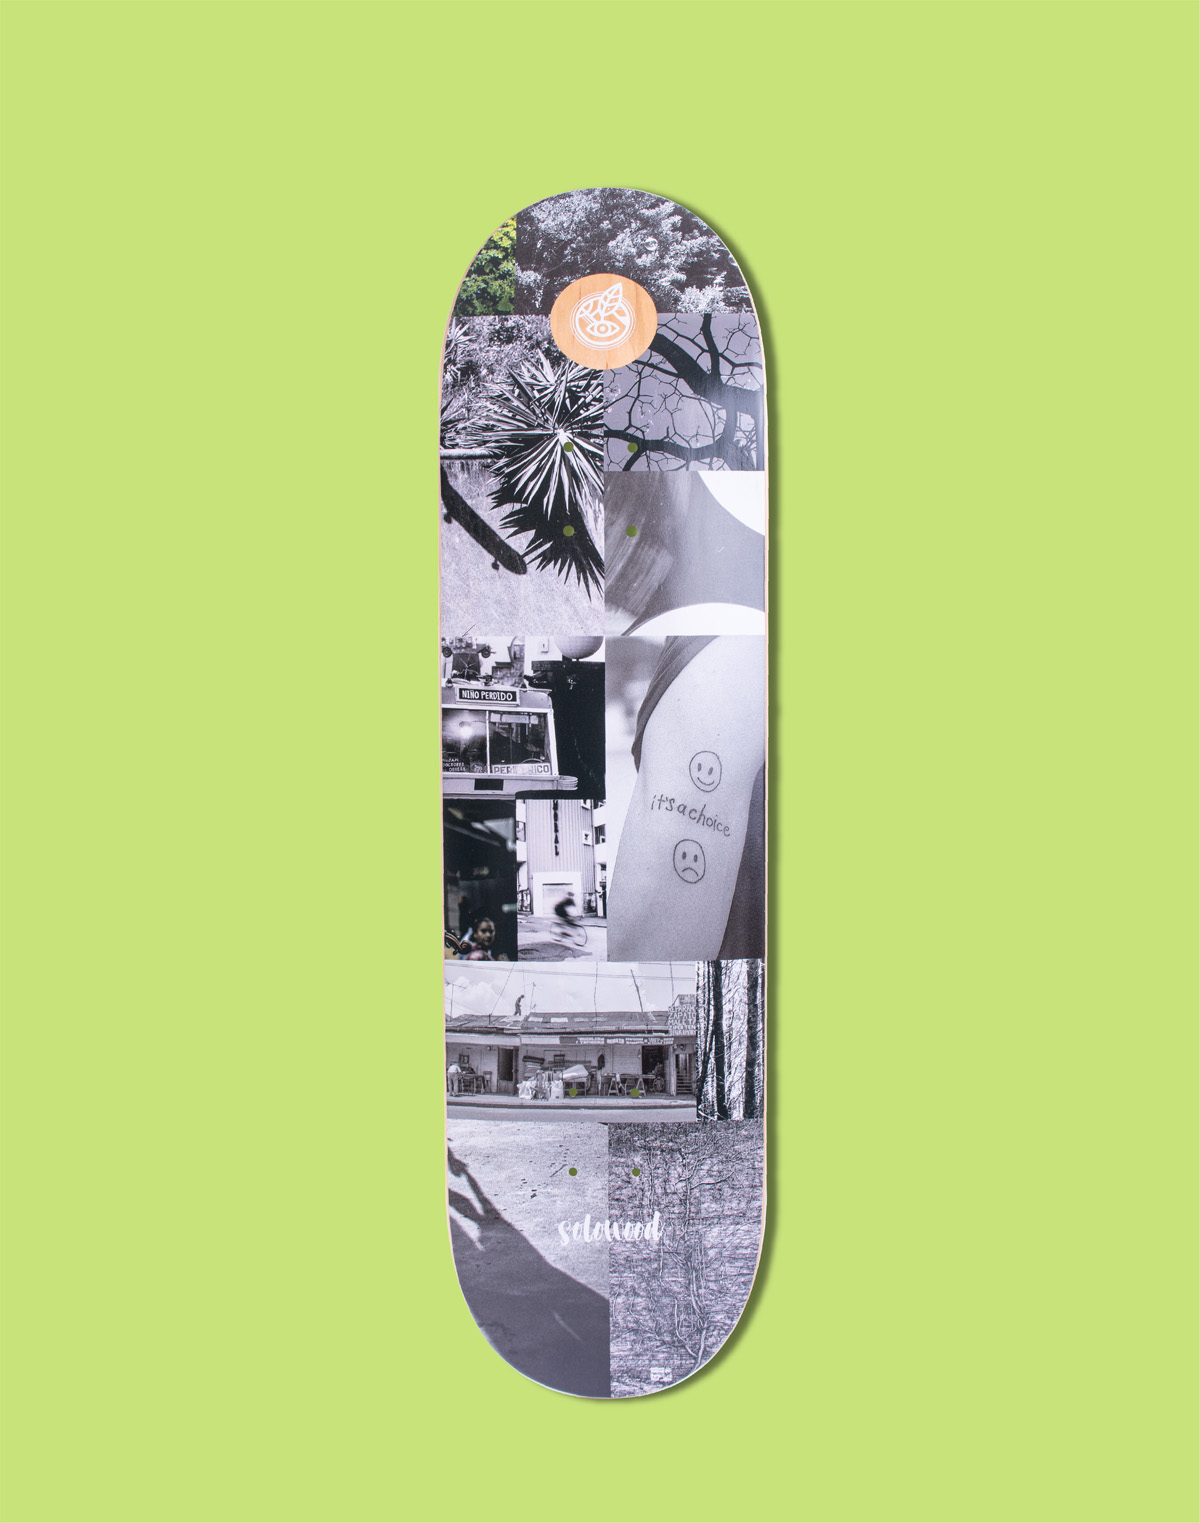 Collage Photo Series By Solowood Skateboards 12